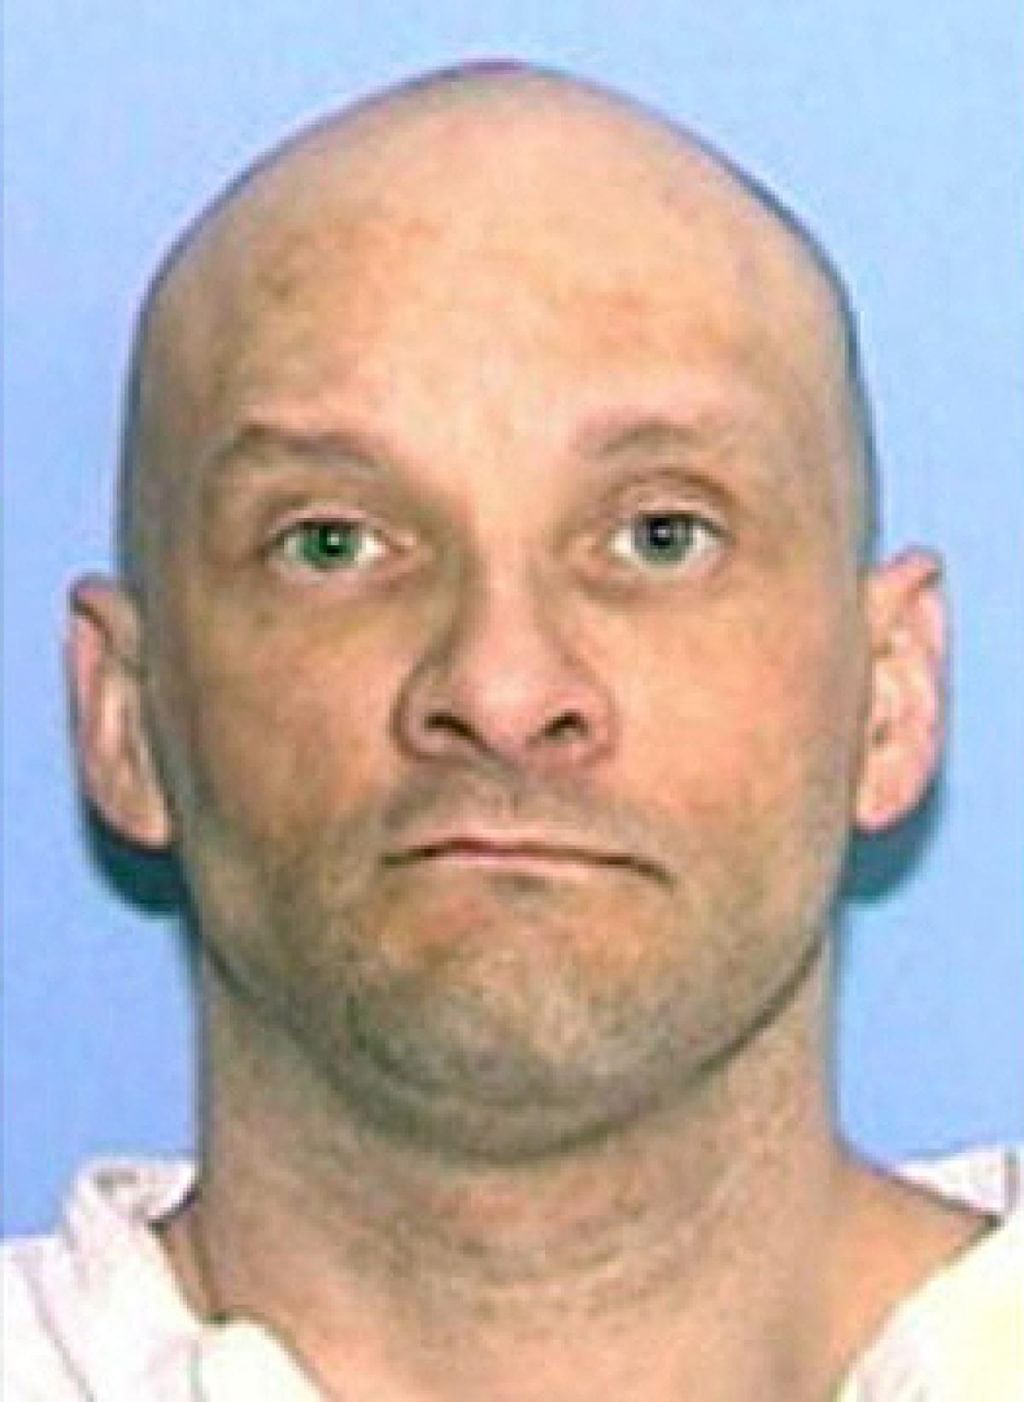 Texas Set to Execute Christopher Wilkins Despite Lawyers' Conflicts of Interest